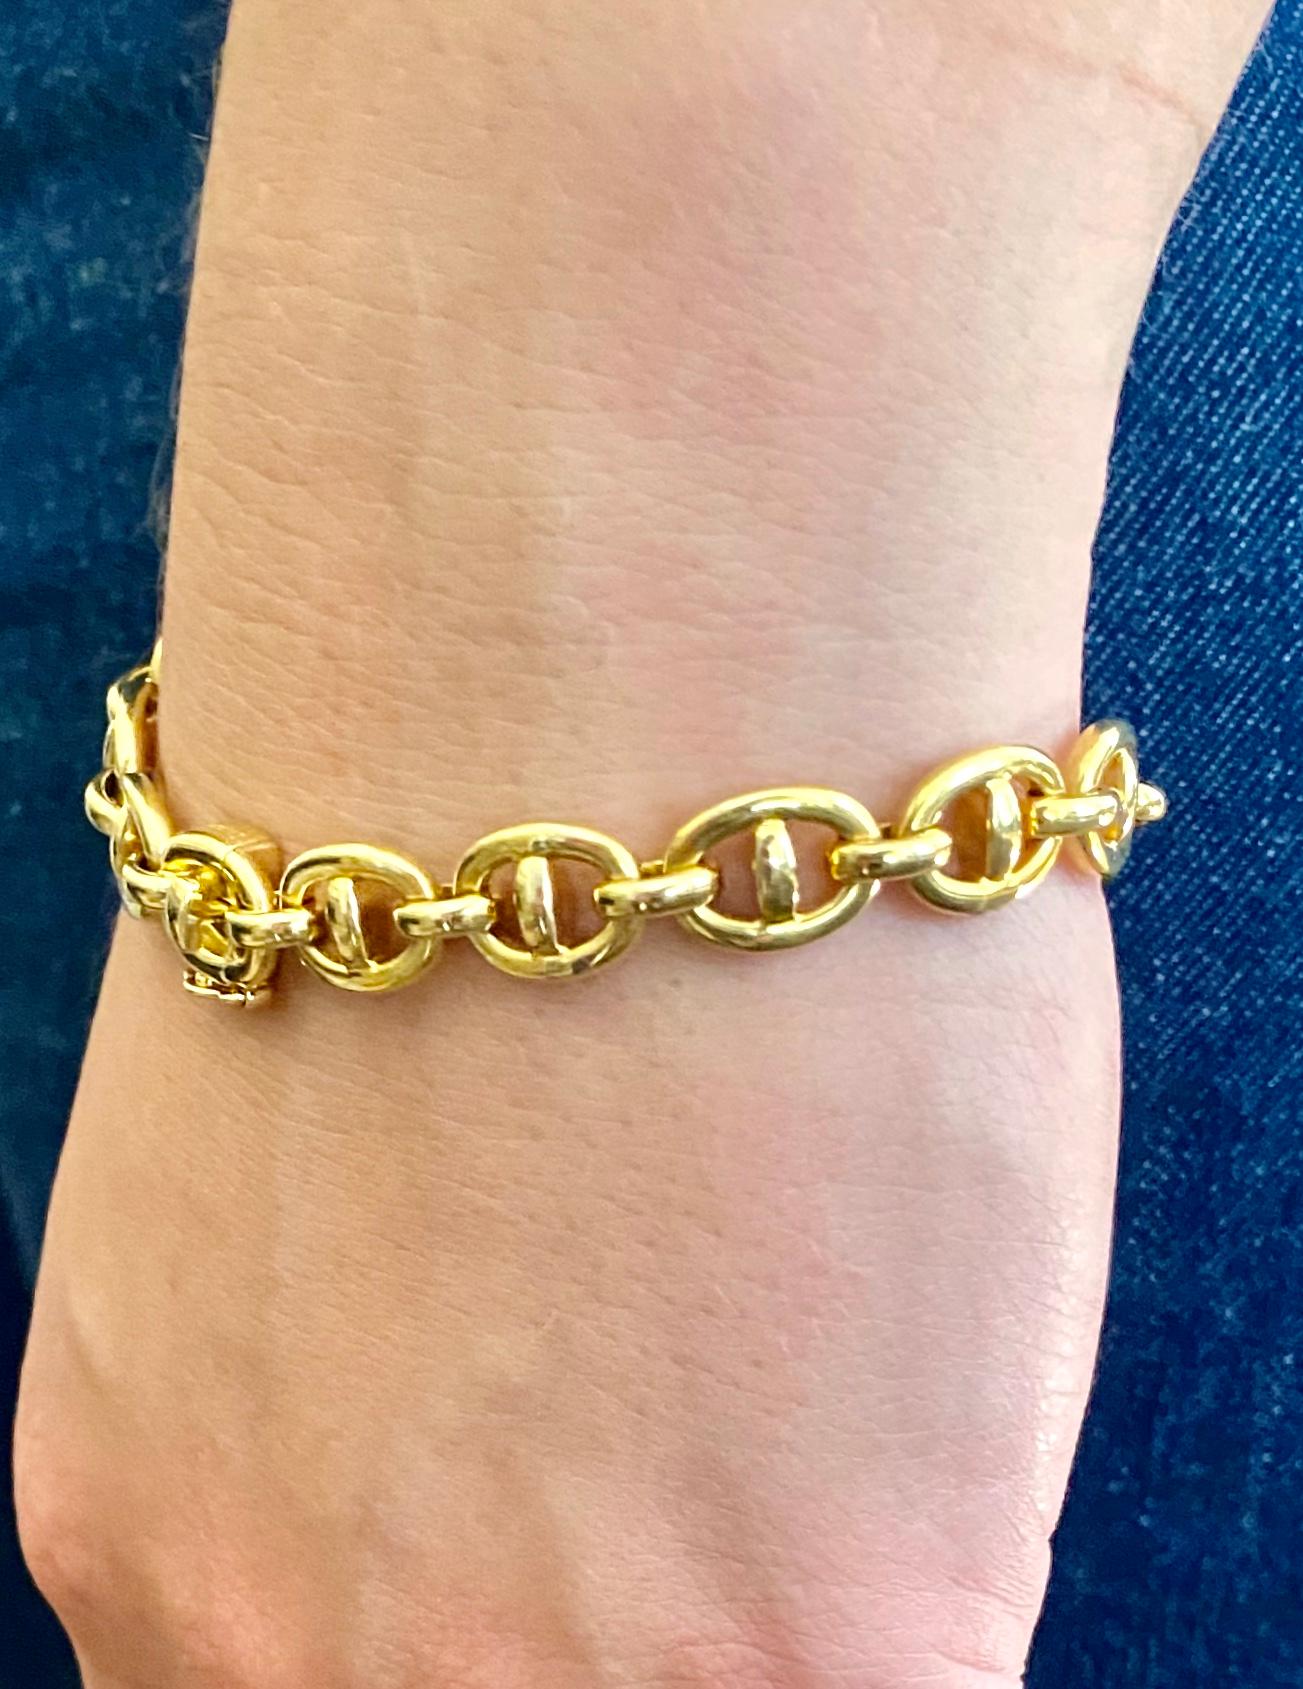 An 18K. yellow gold link bracelet with box clasp and safety catch,
Solid Gold. 16 links (including the lock)
Signed: Cartier (2x) individual no: E85332 and 1995
hawk head and Dutch warranty mark 18K. (tulip and 750)
length: 19.8 cm, width: 8.5 mm